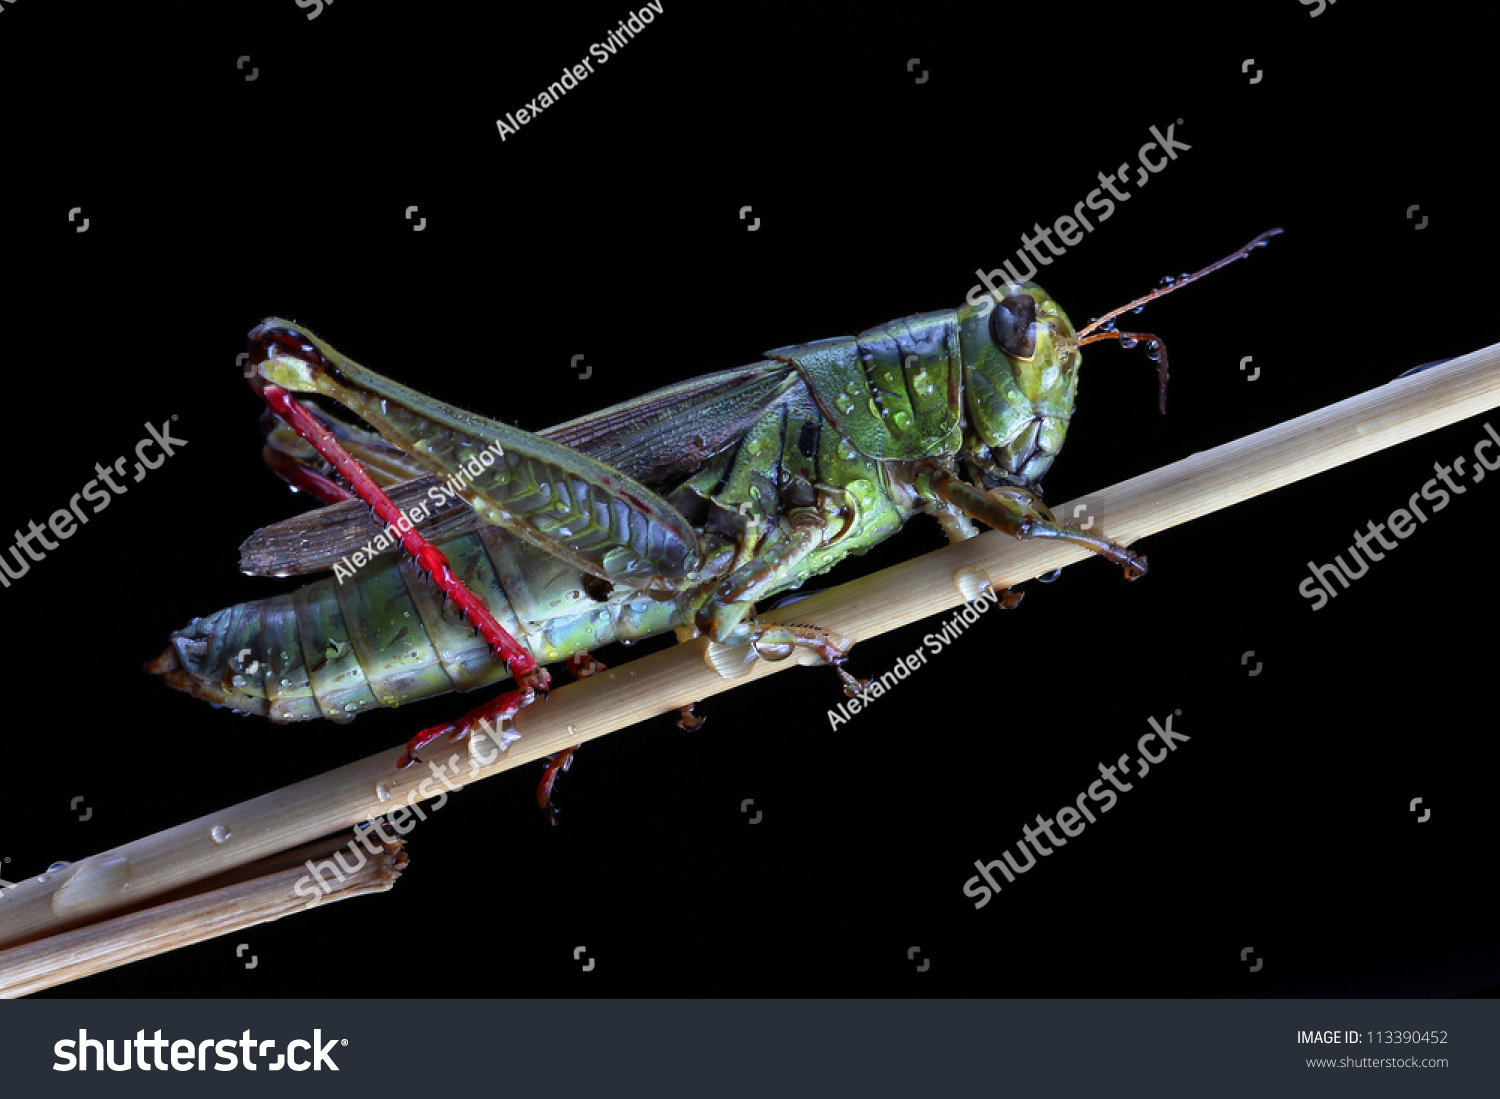 Closeup view of grasshopper with water drops isolated on black background #113390452